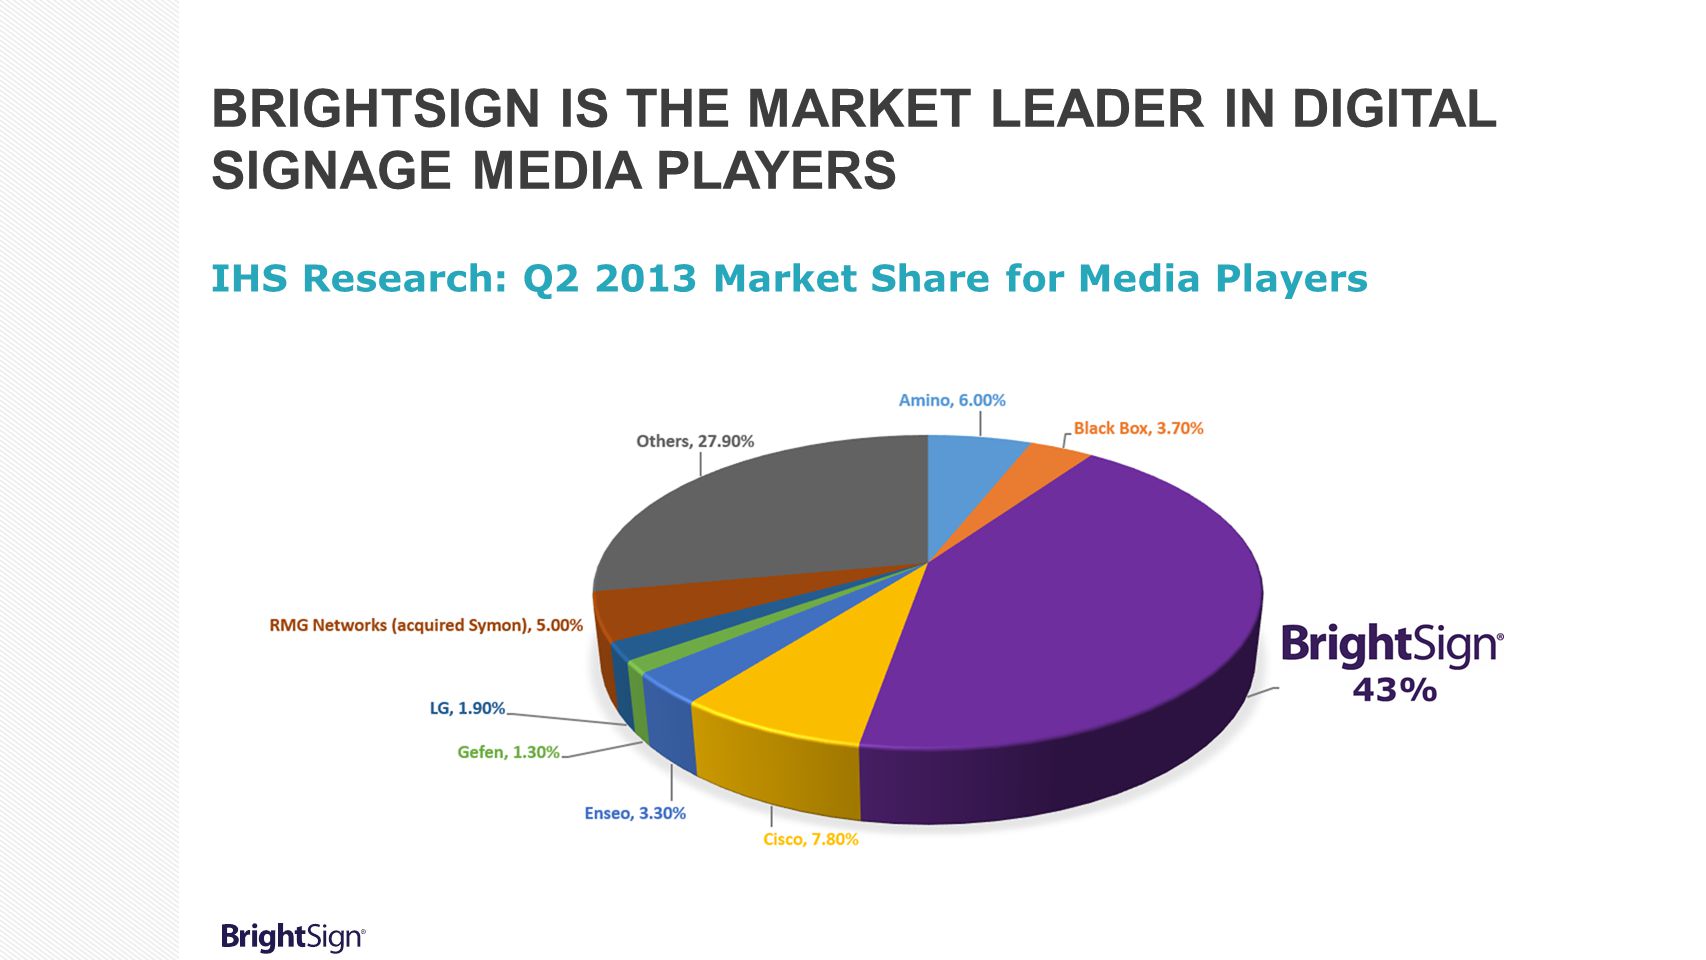 BrightSign is the Market Leader in Digital Signage Media Players